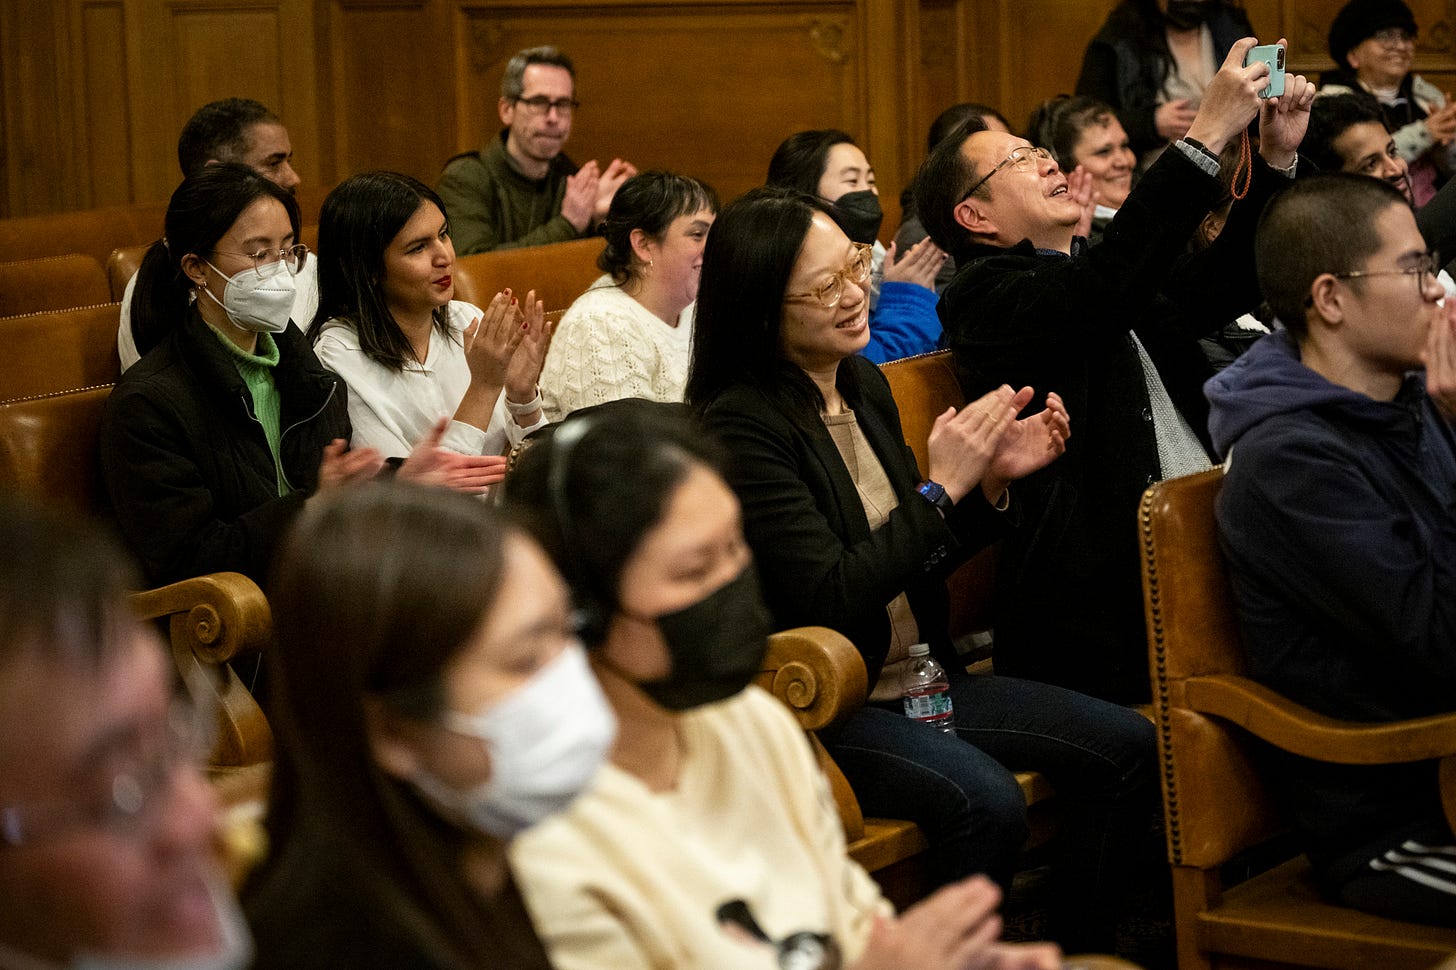 A group of people with some wearing masks, applaud in a room.